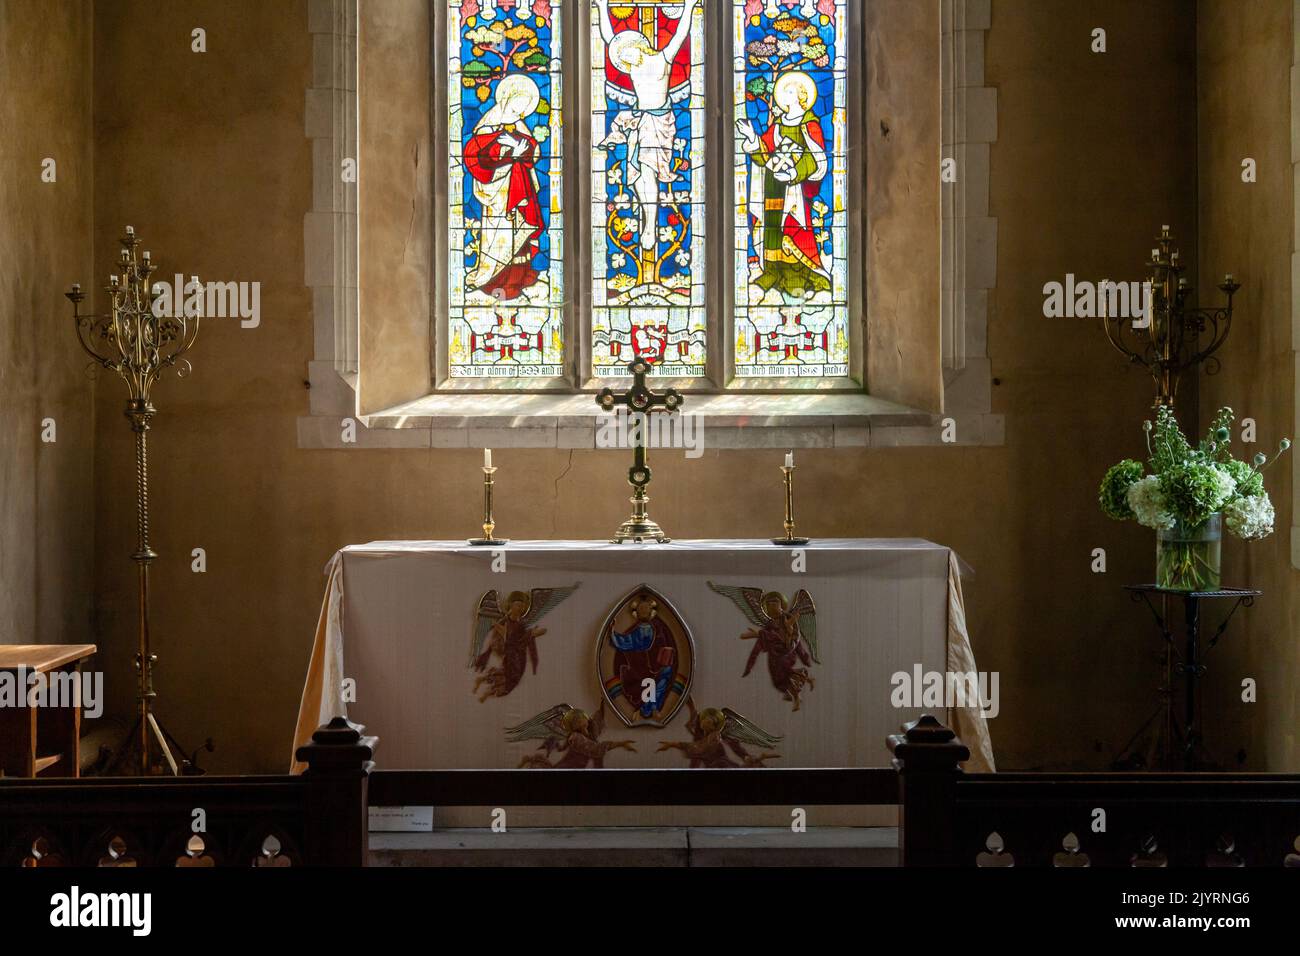 The alter in St Andrews Church Nether Wallop, Hampshire, England Stock Photo